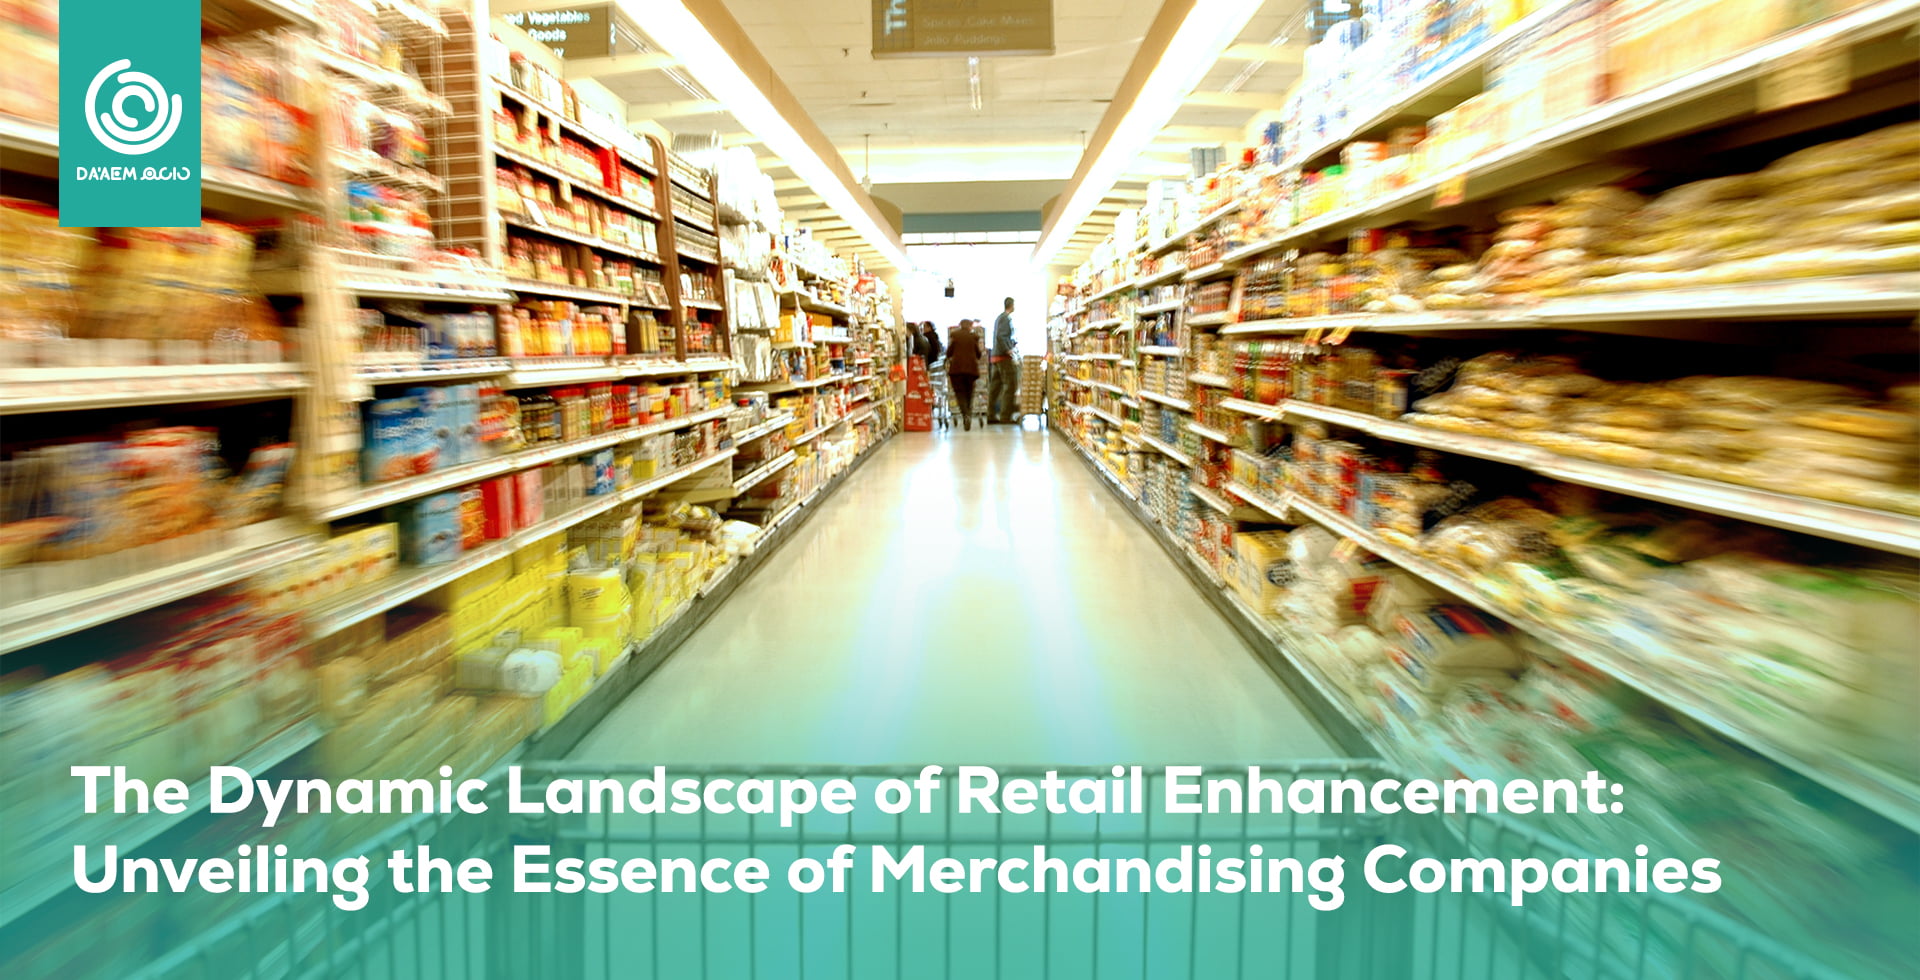 The Dynamic Landscape of Retail Enhancement: Unveiling the Essence of Merchandising Companies